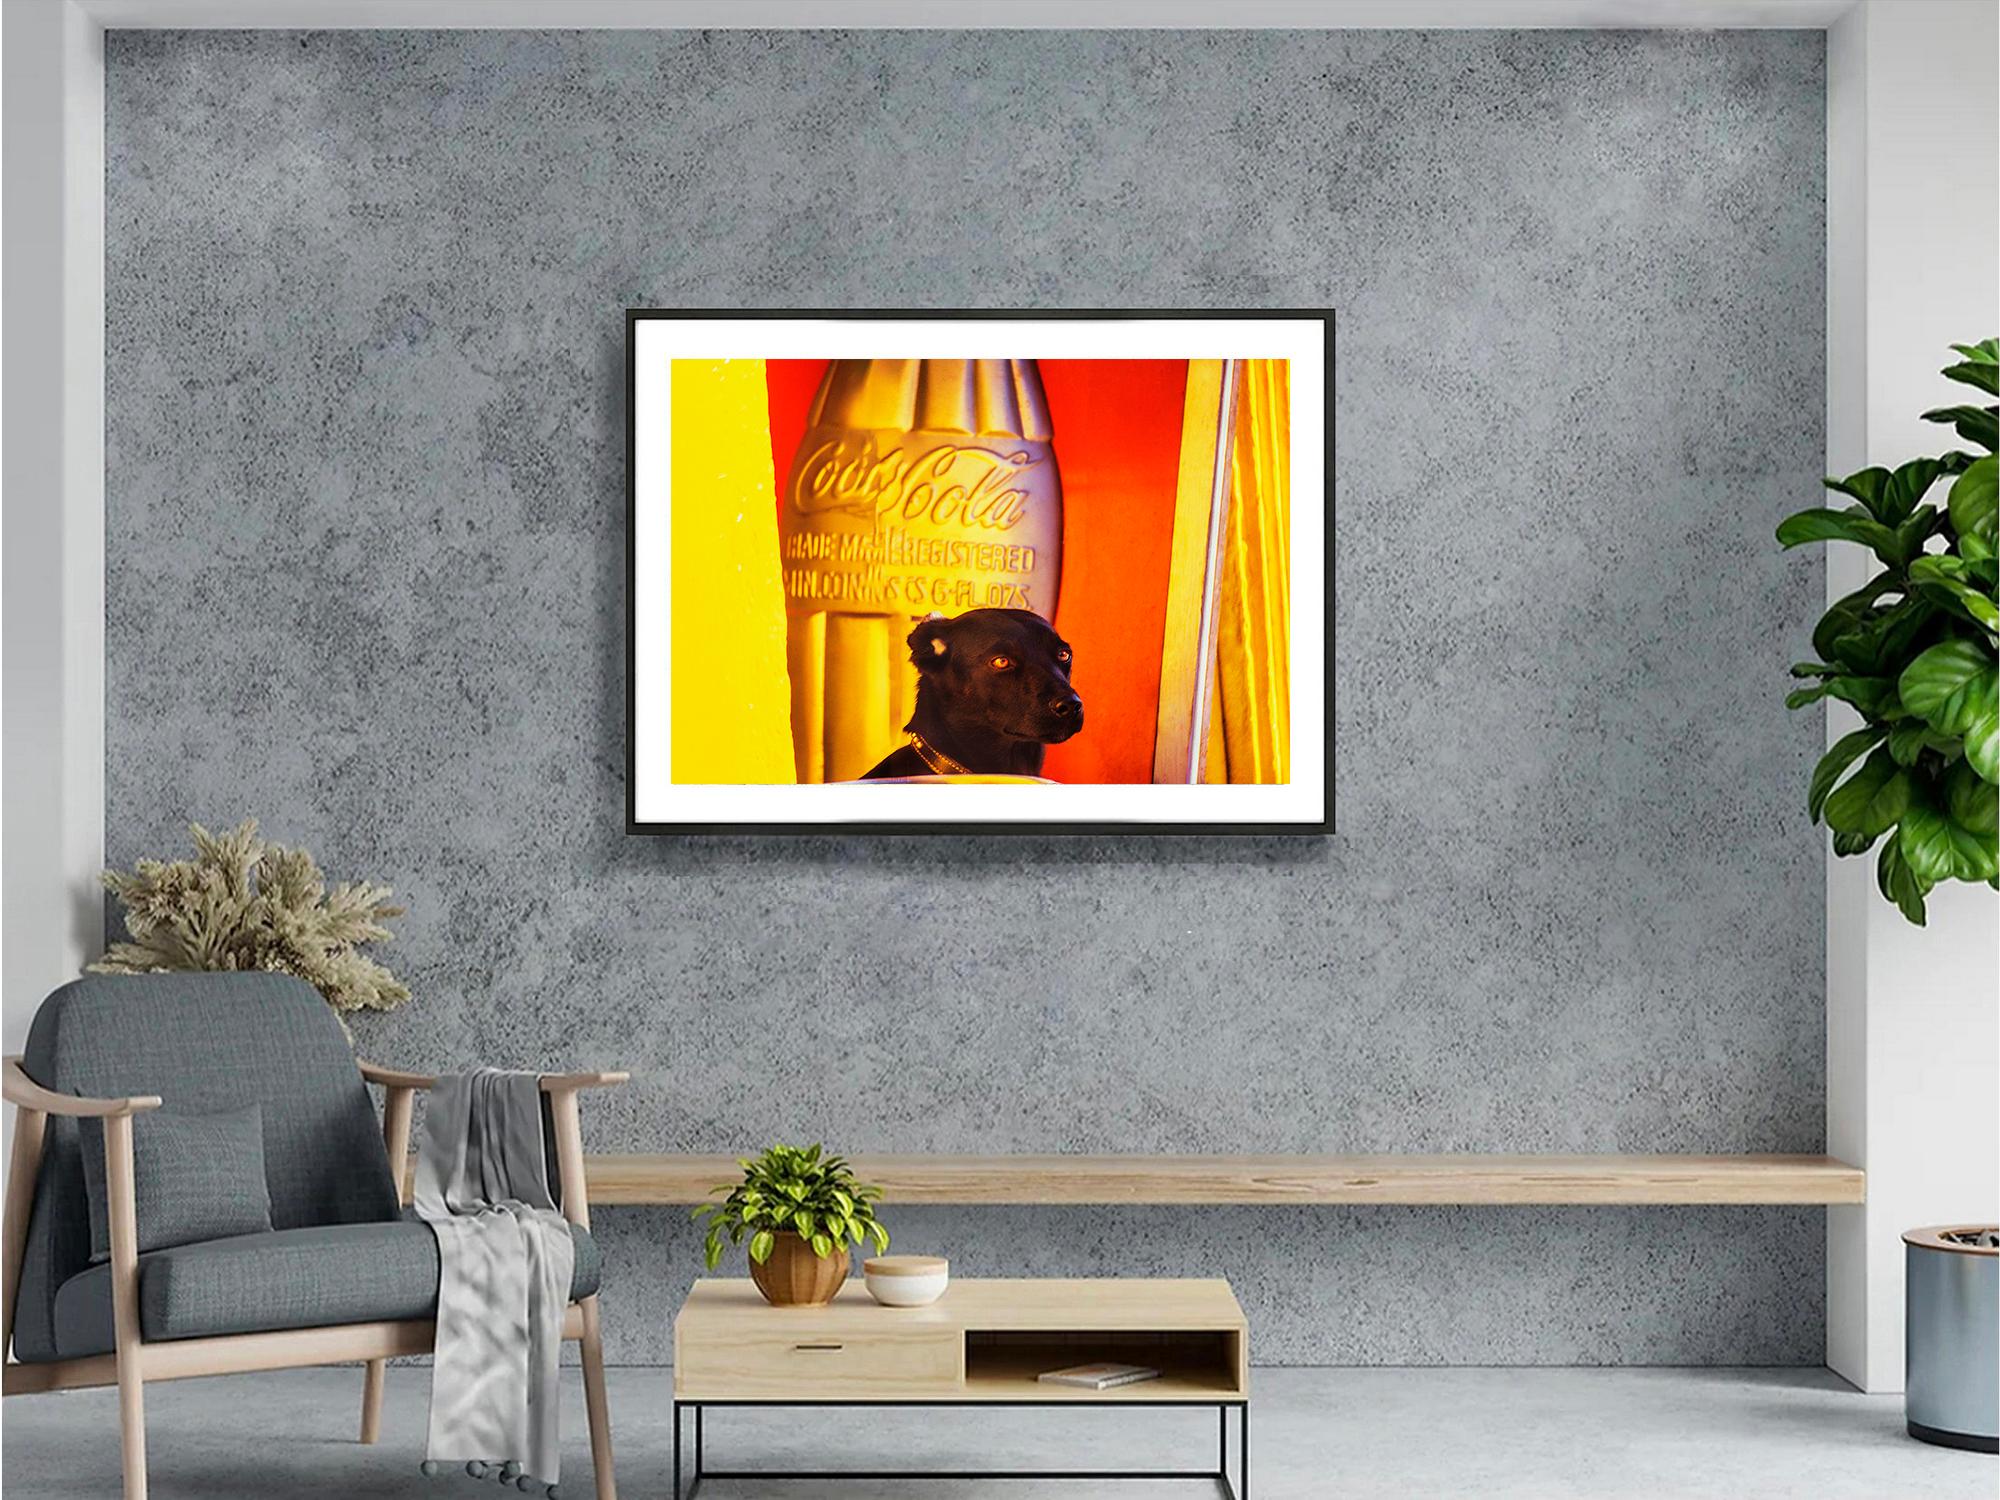 Cute Black Dog Against a Graphic Yellow Orange Wall in Mexico - Color-Field Photograph by Mitchell Funk